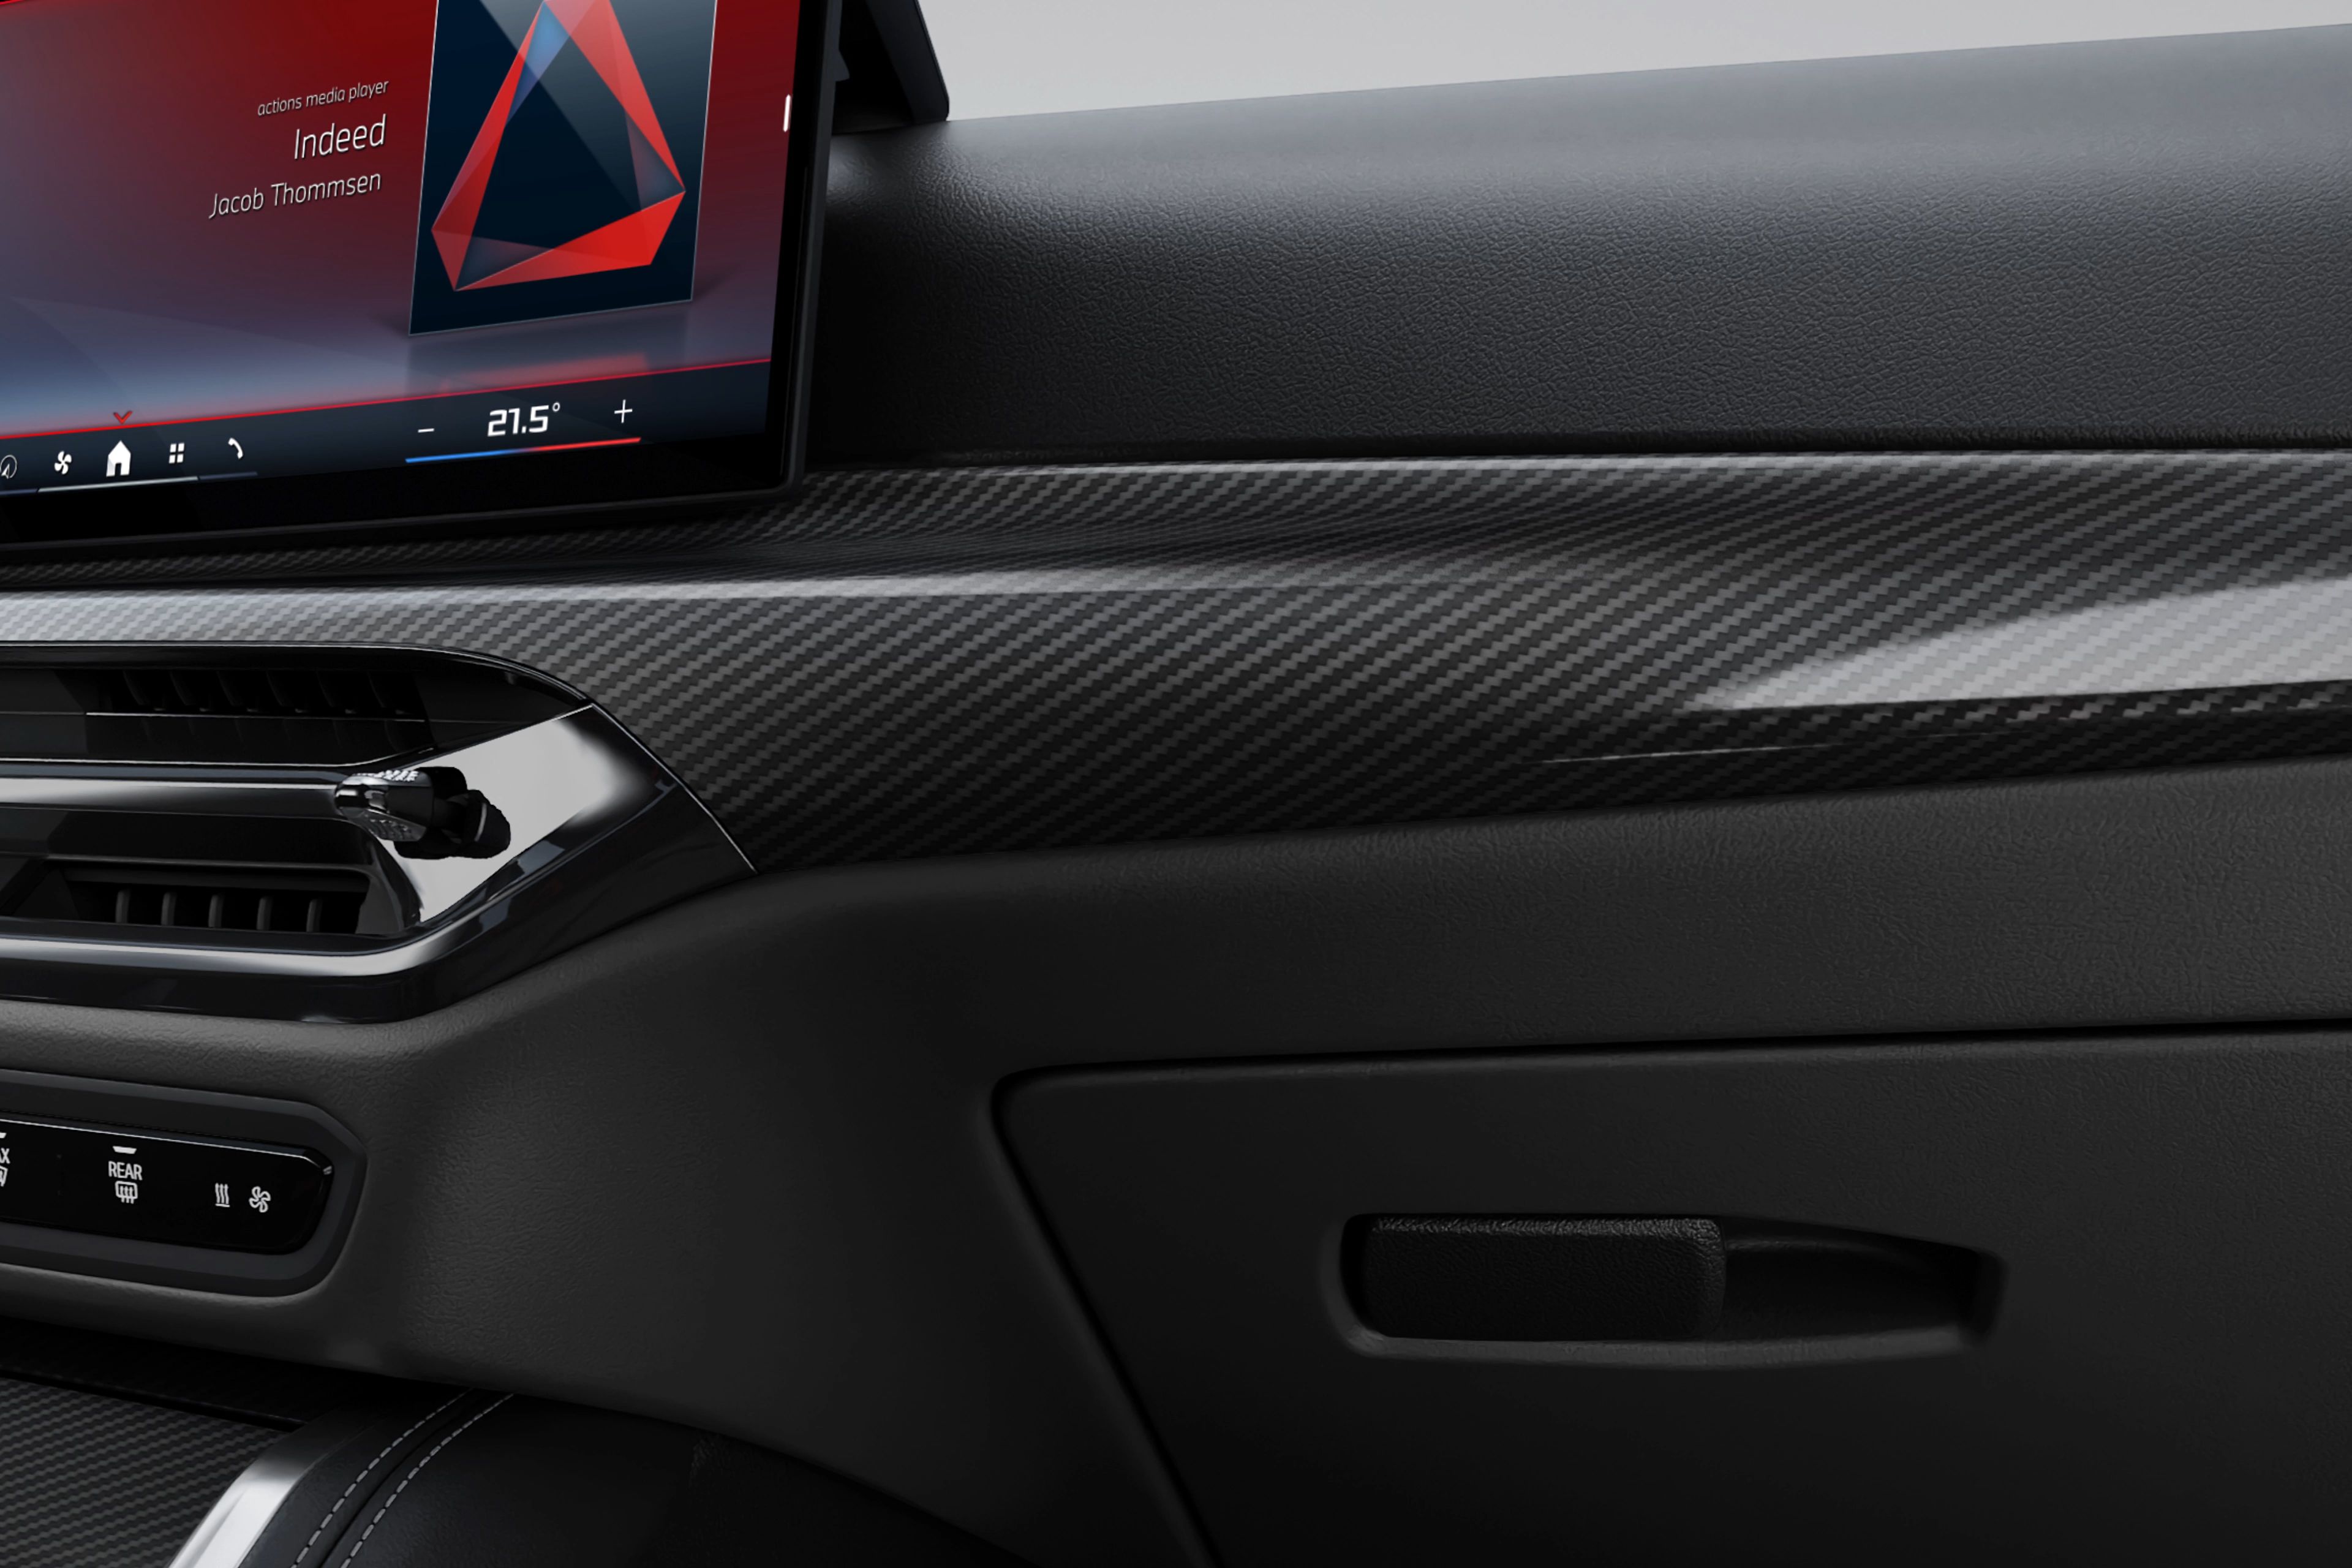 Available Carbon Fiber Trim finishes on the BMW M440i